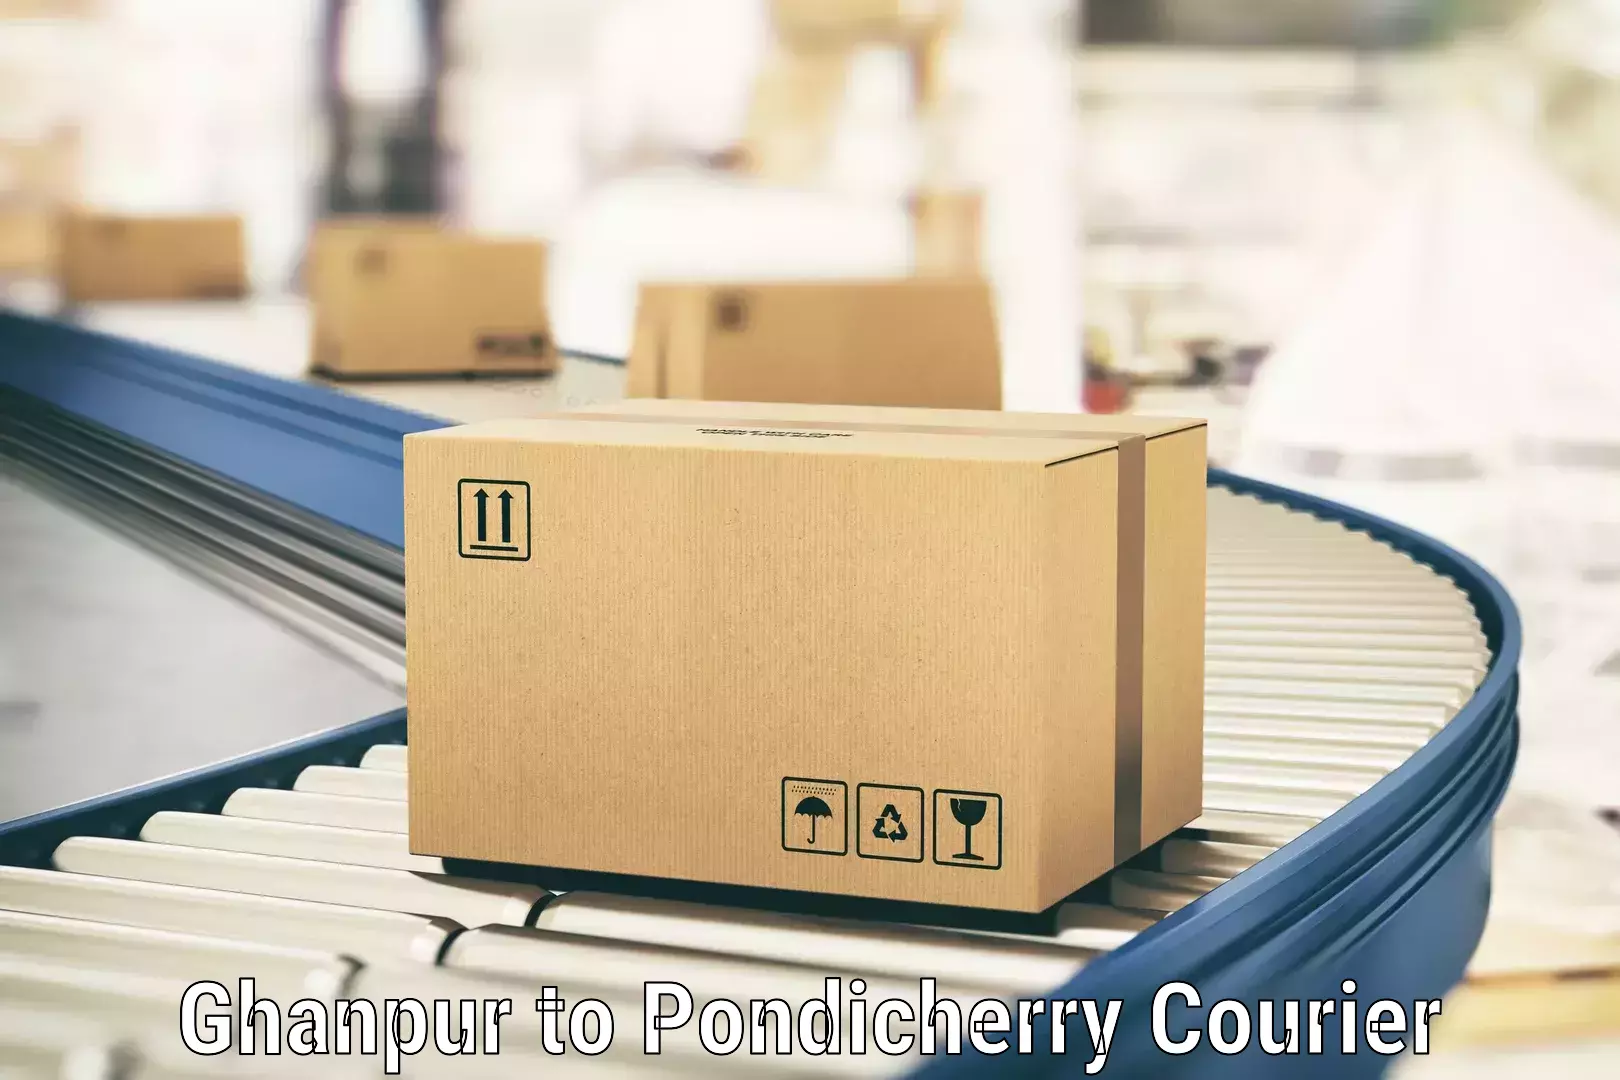 Comprehensive parcel tracking Ghanpur to Pondicherry